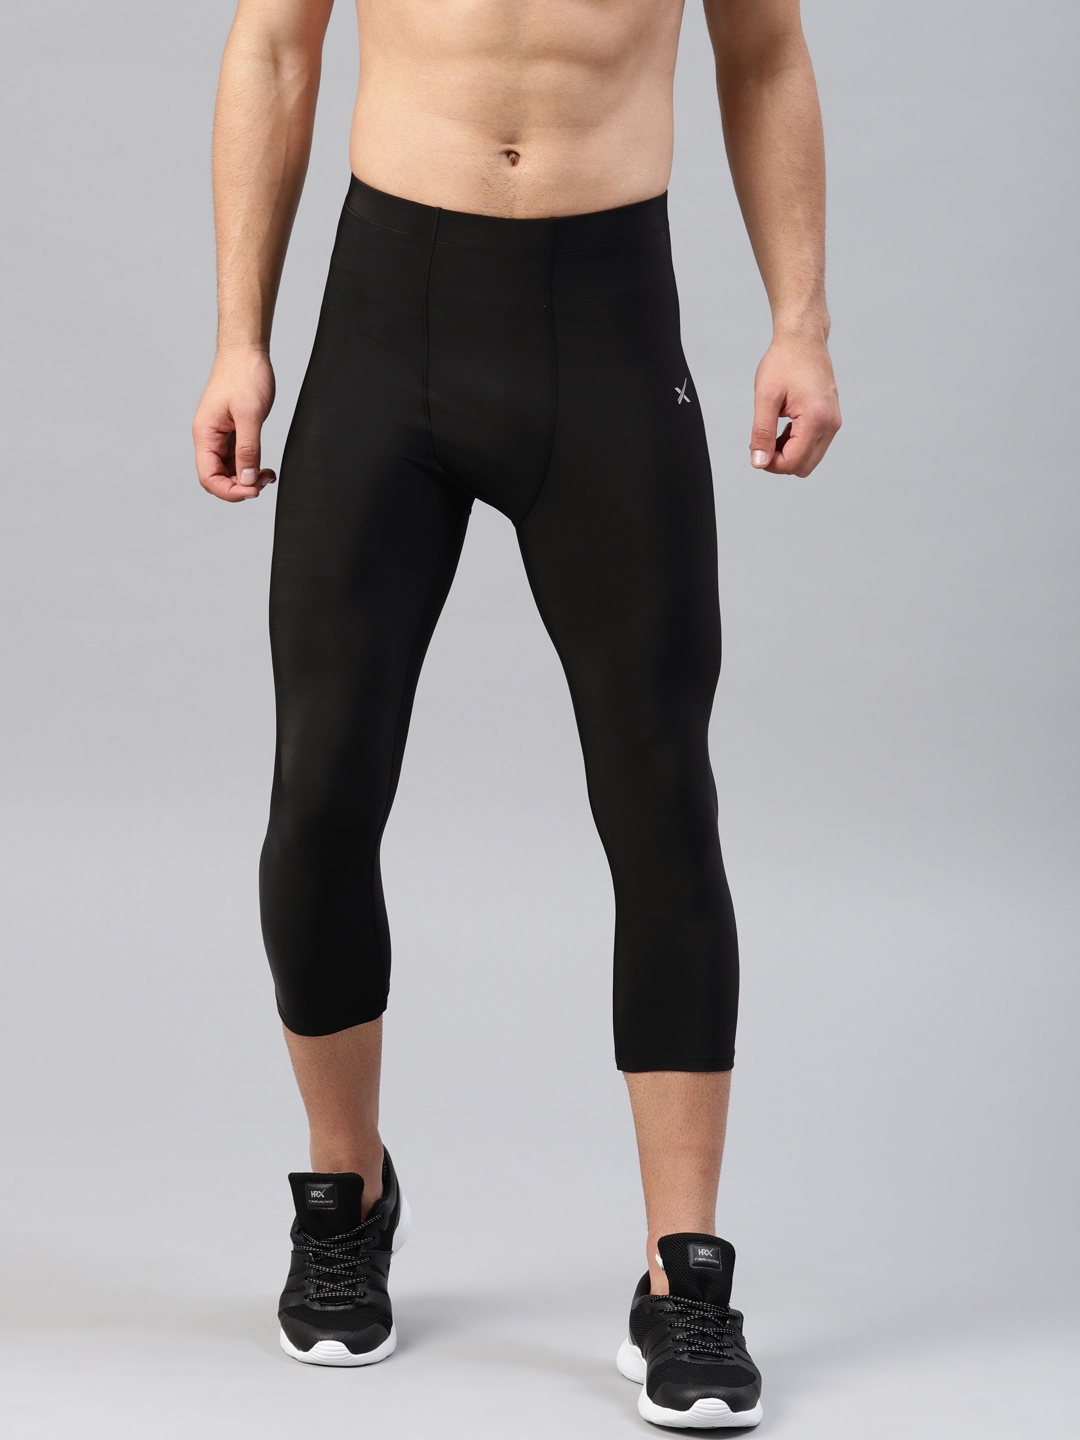 ReDesign Apparels Recharge Men Polyester Sports Compression  Pant/Legging/Full Tights